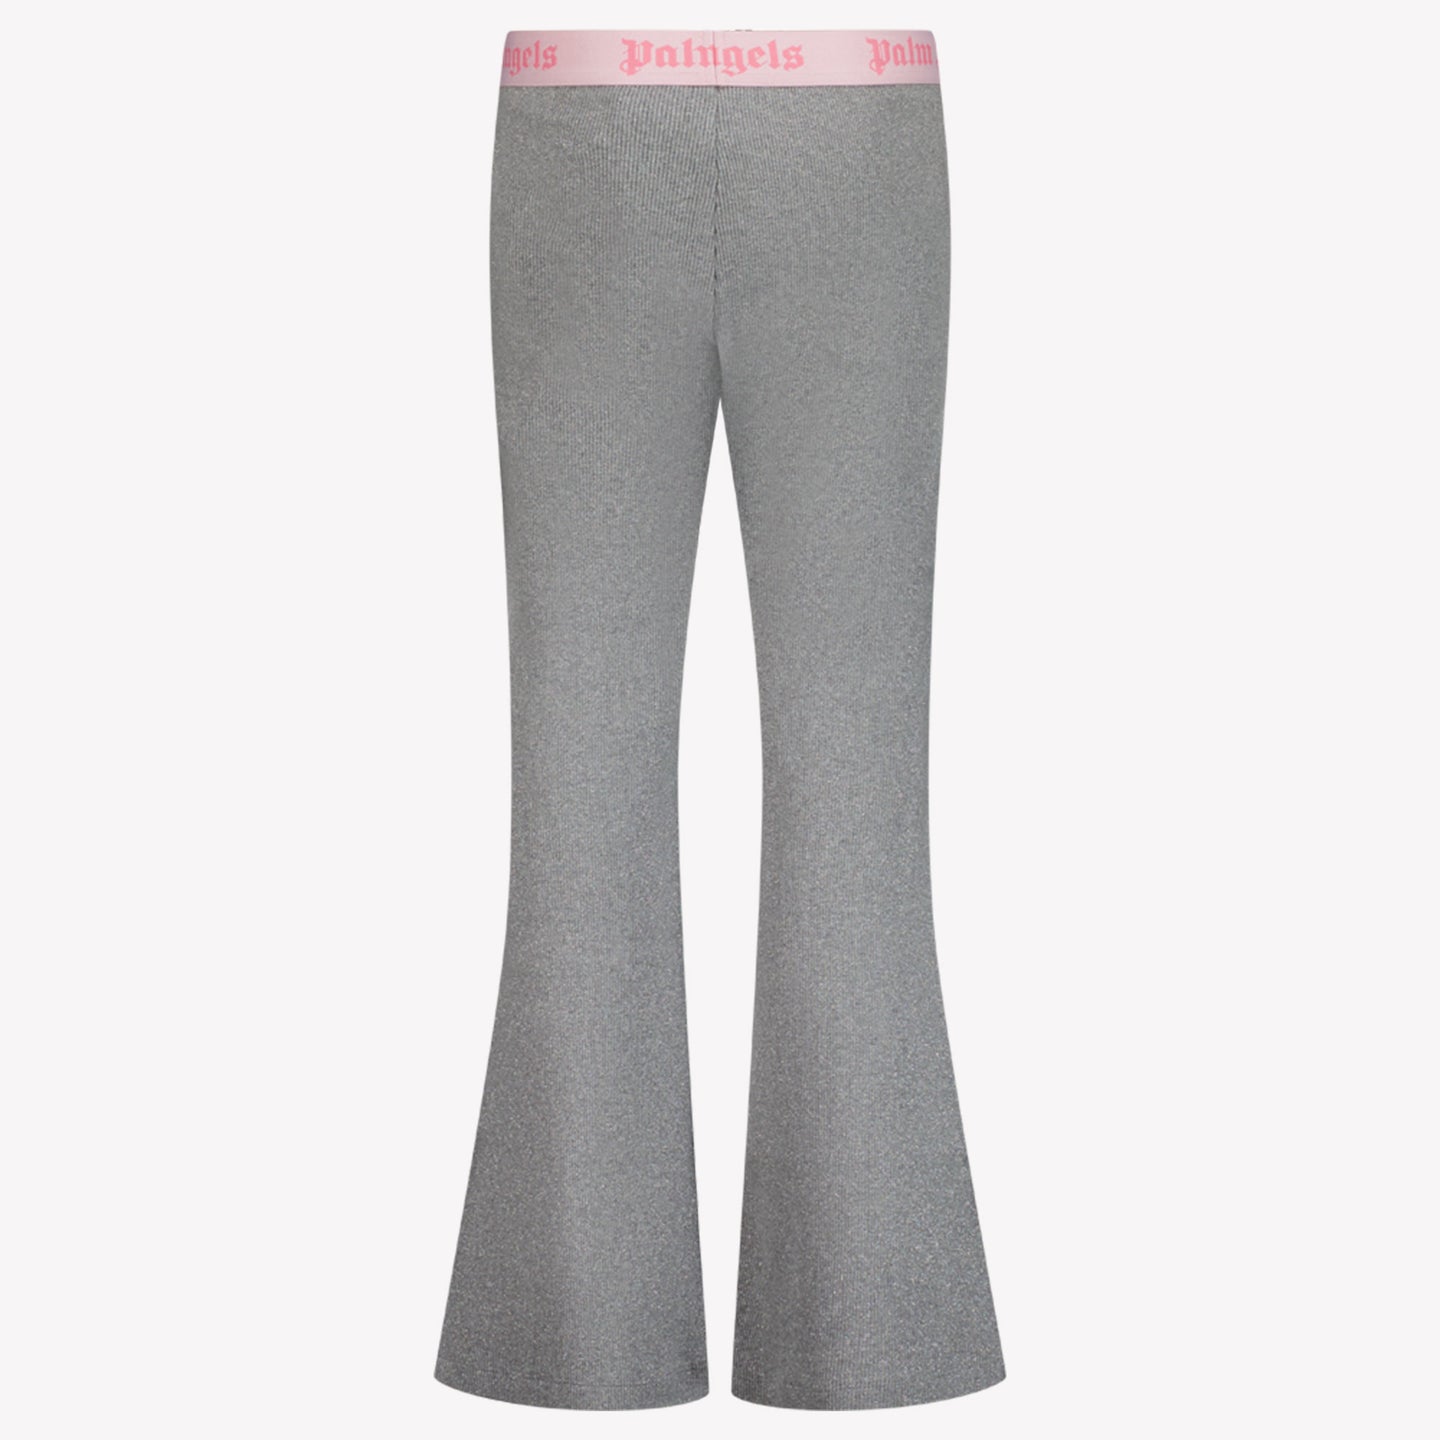 Palm Angels Girls Pants Silver